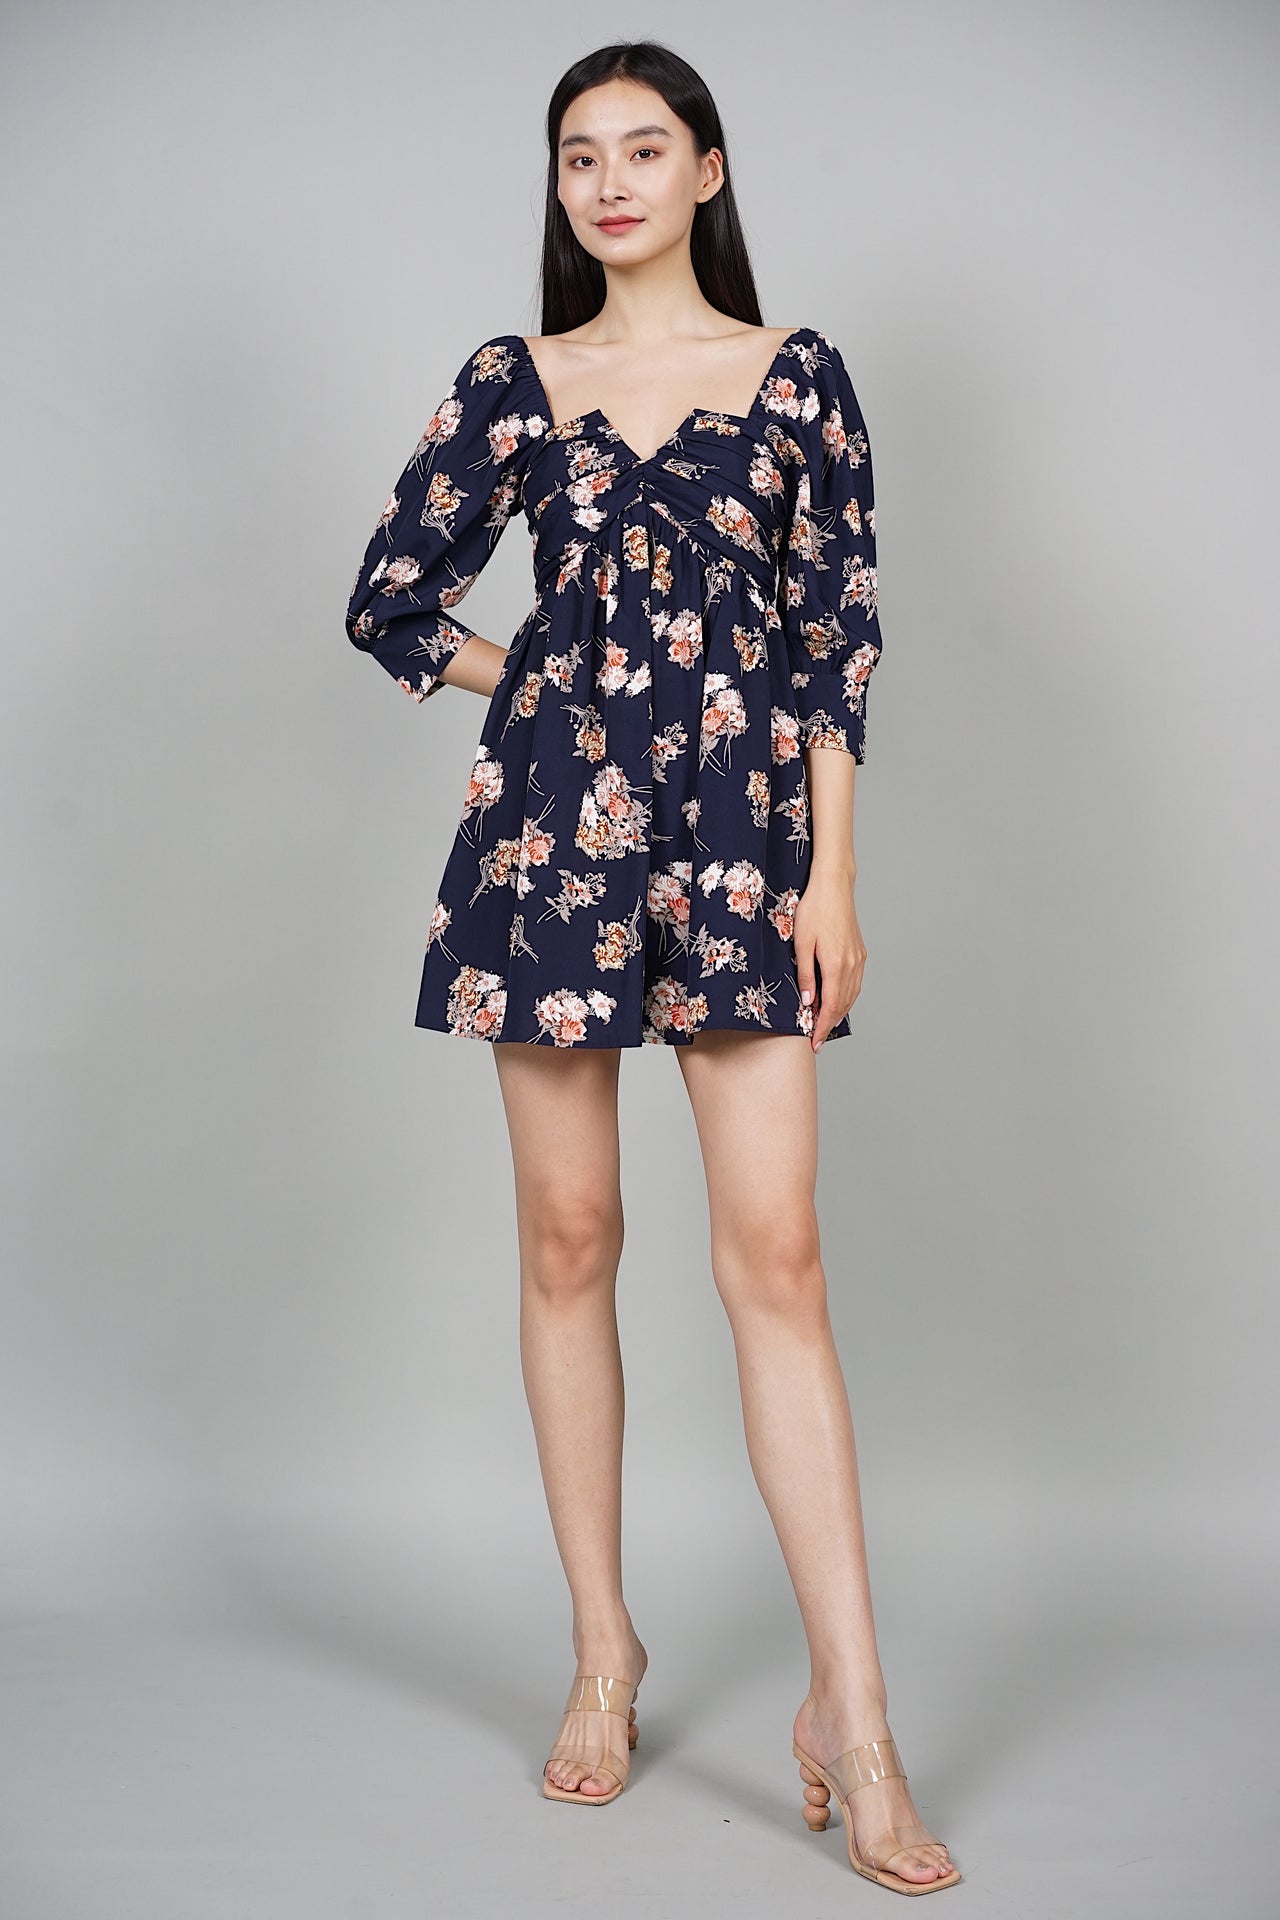 Julissa Gathered Puffy Dress in Navy Floral